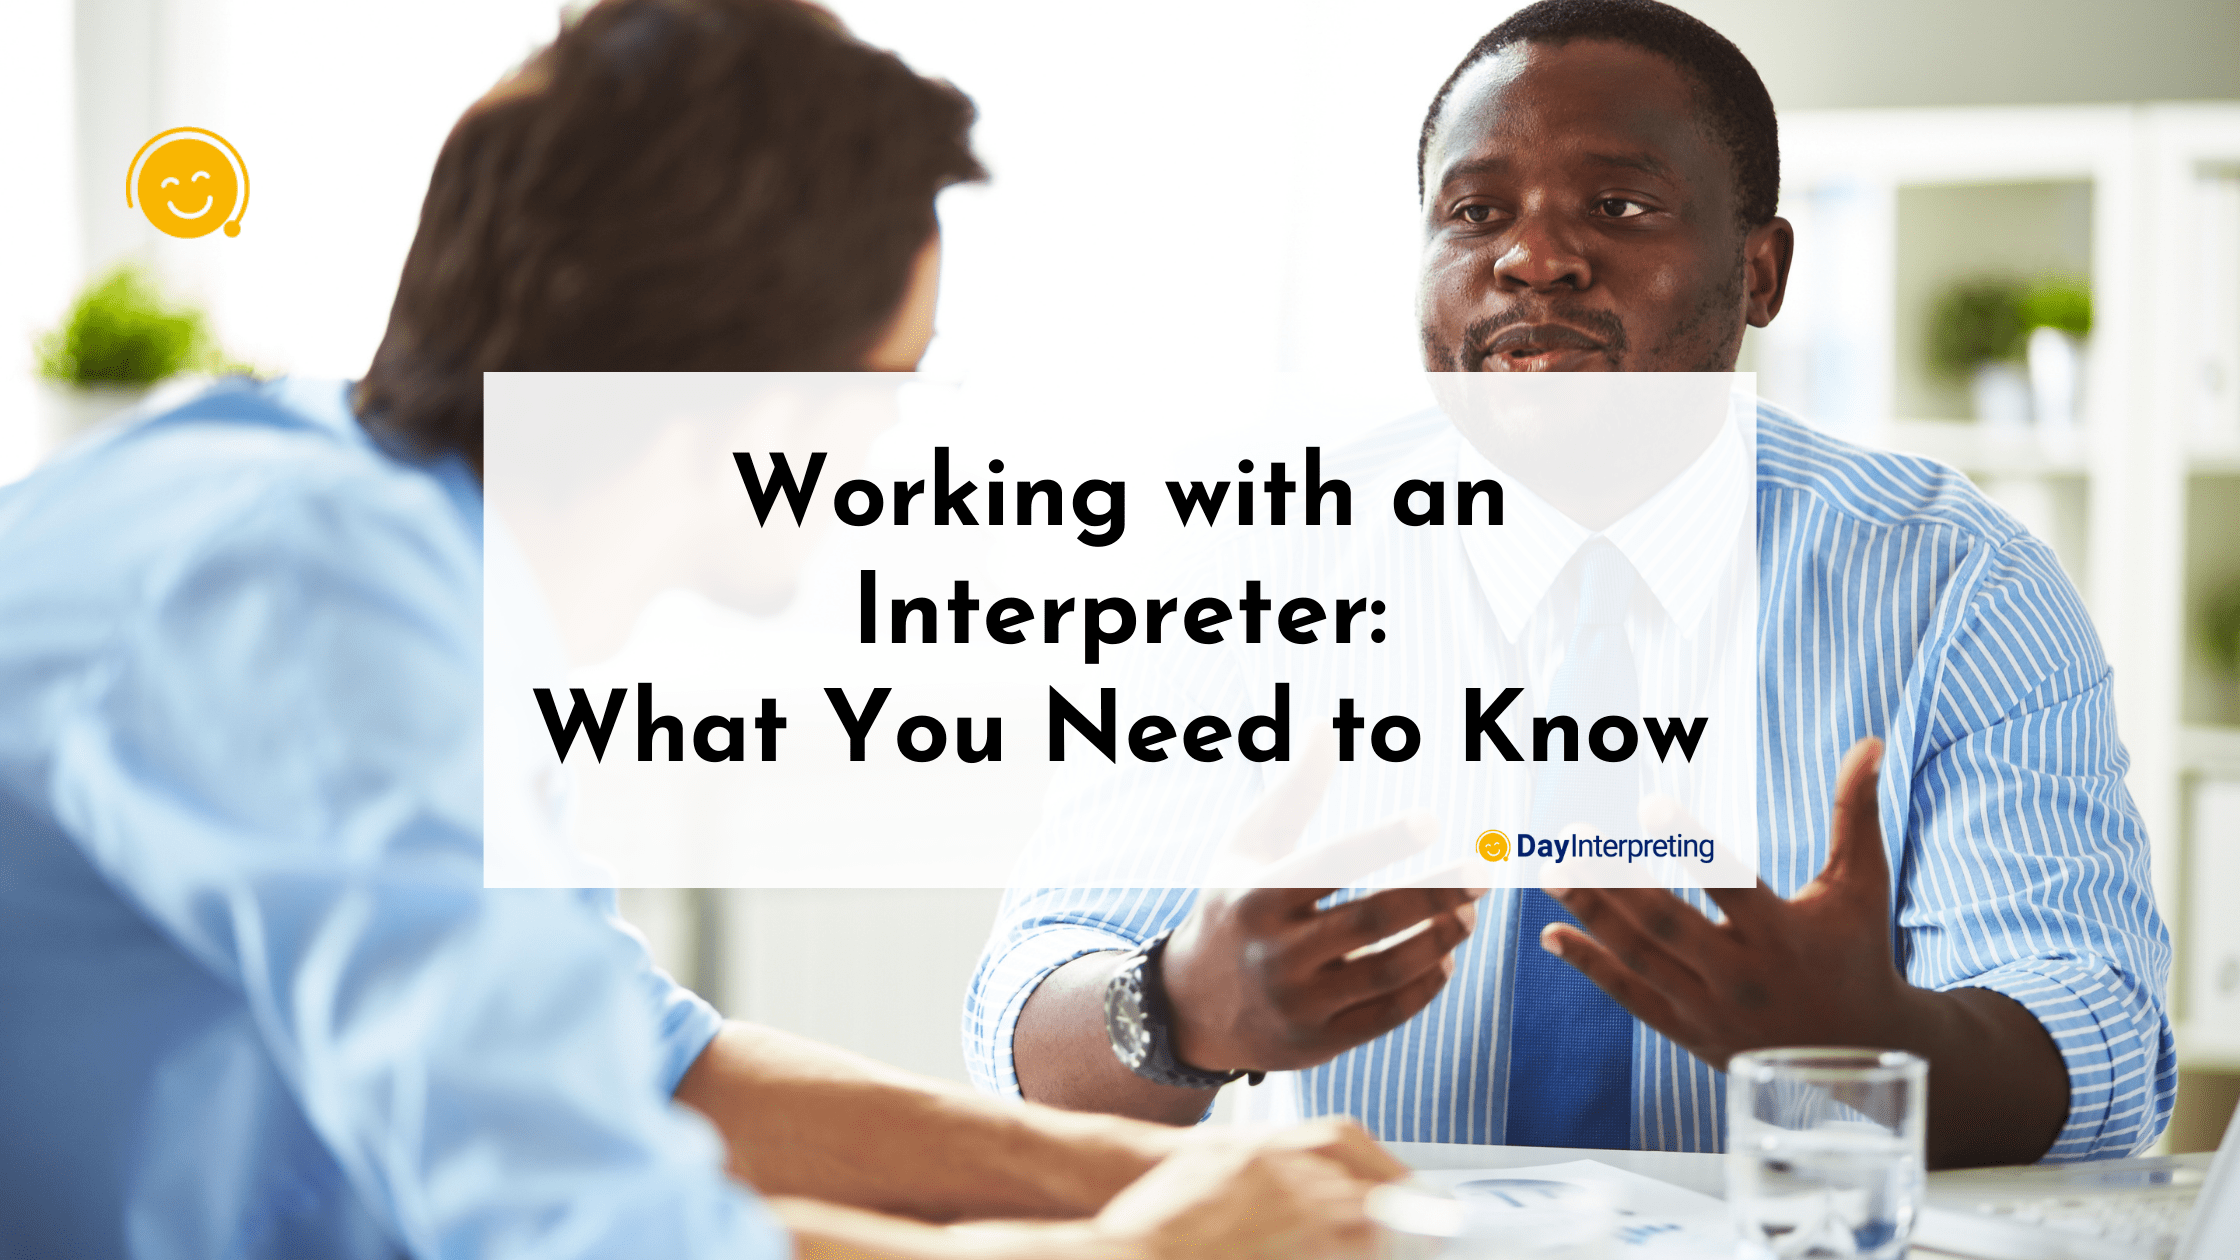 Working with an Interpreter: What You Need to Know